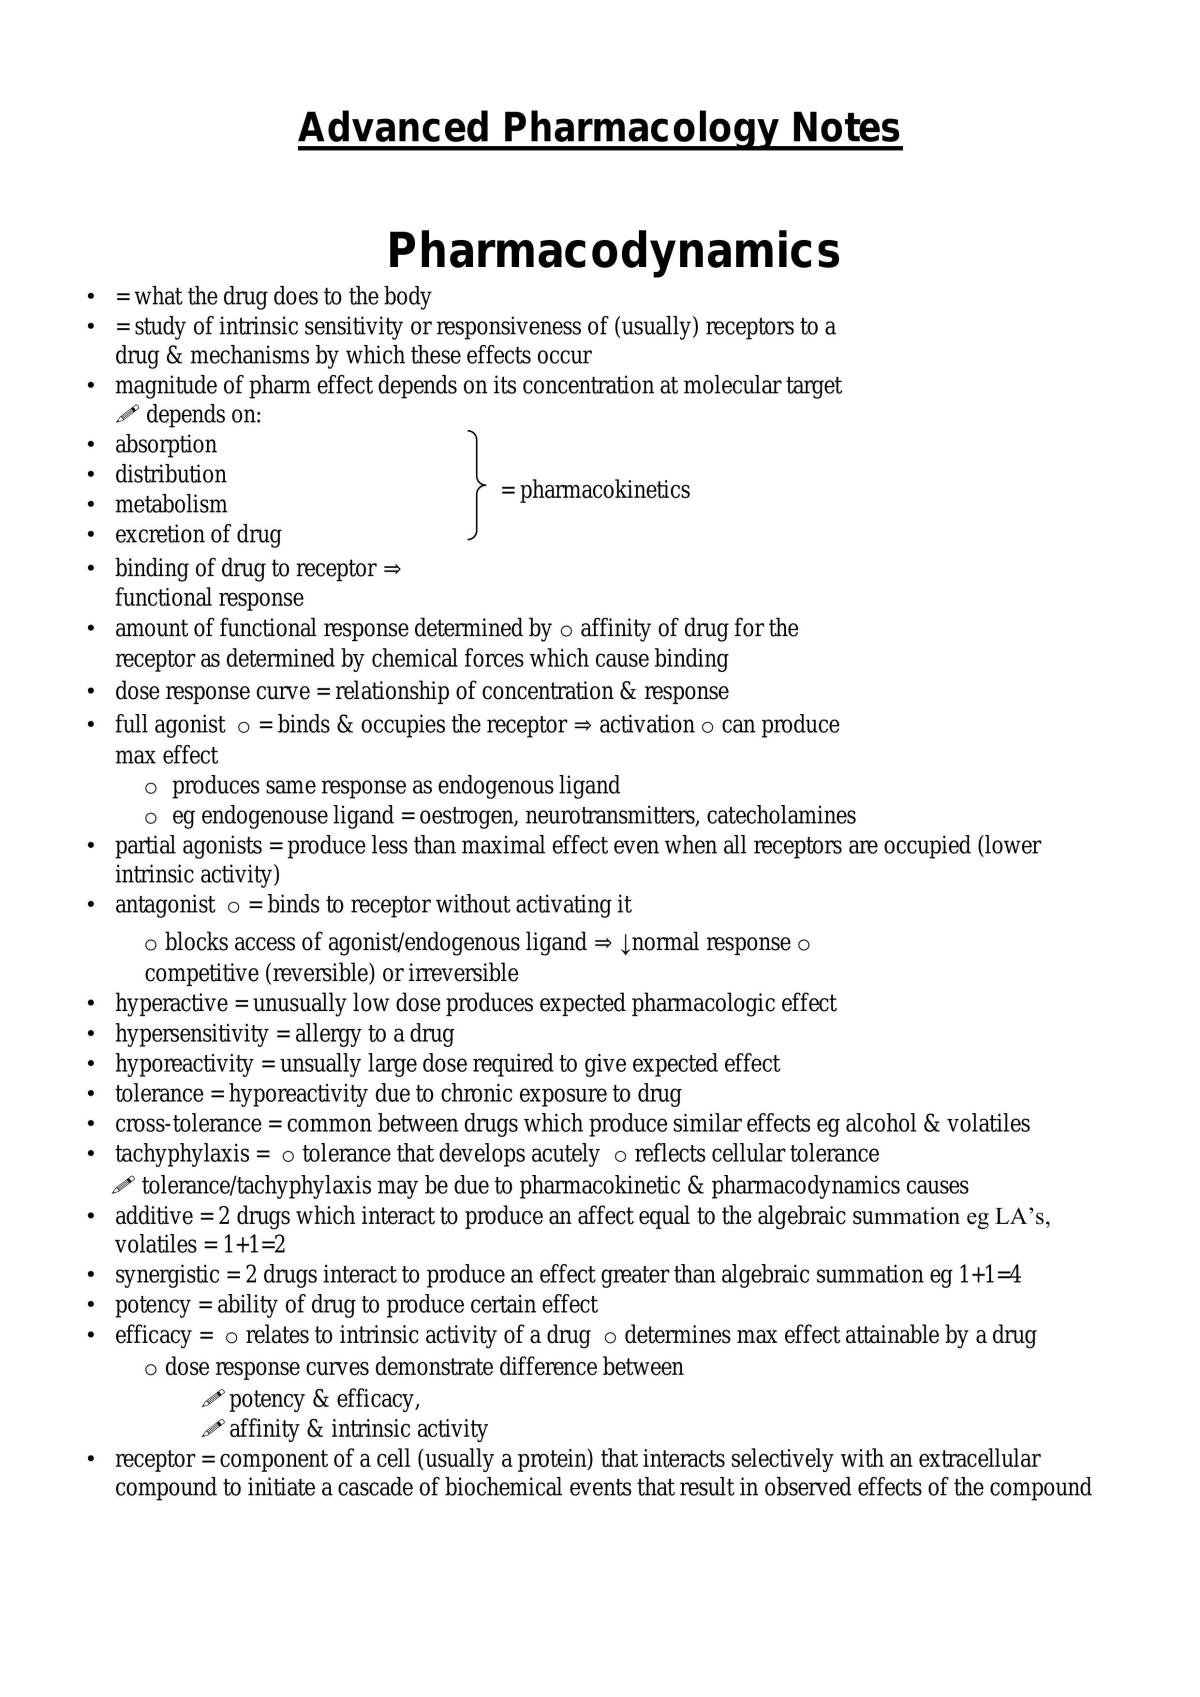 Advanced Pharmacology Notes - Page 1